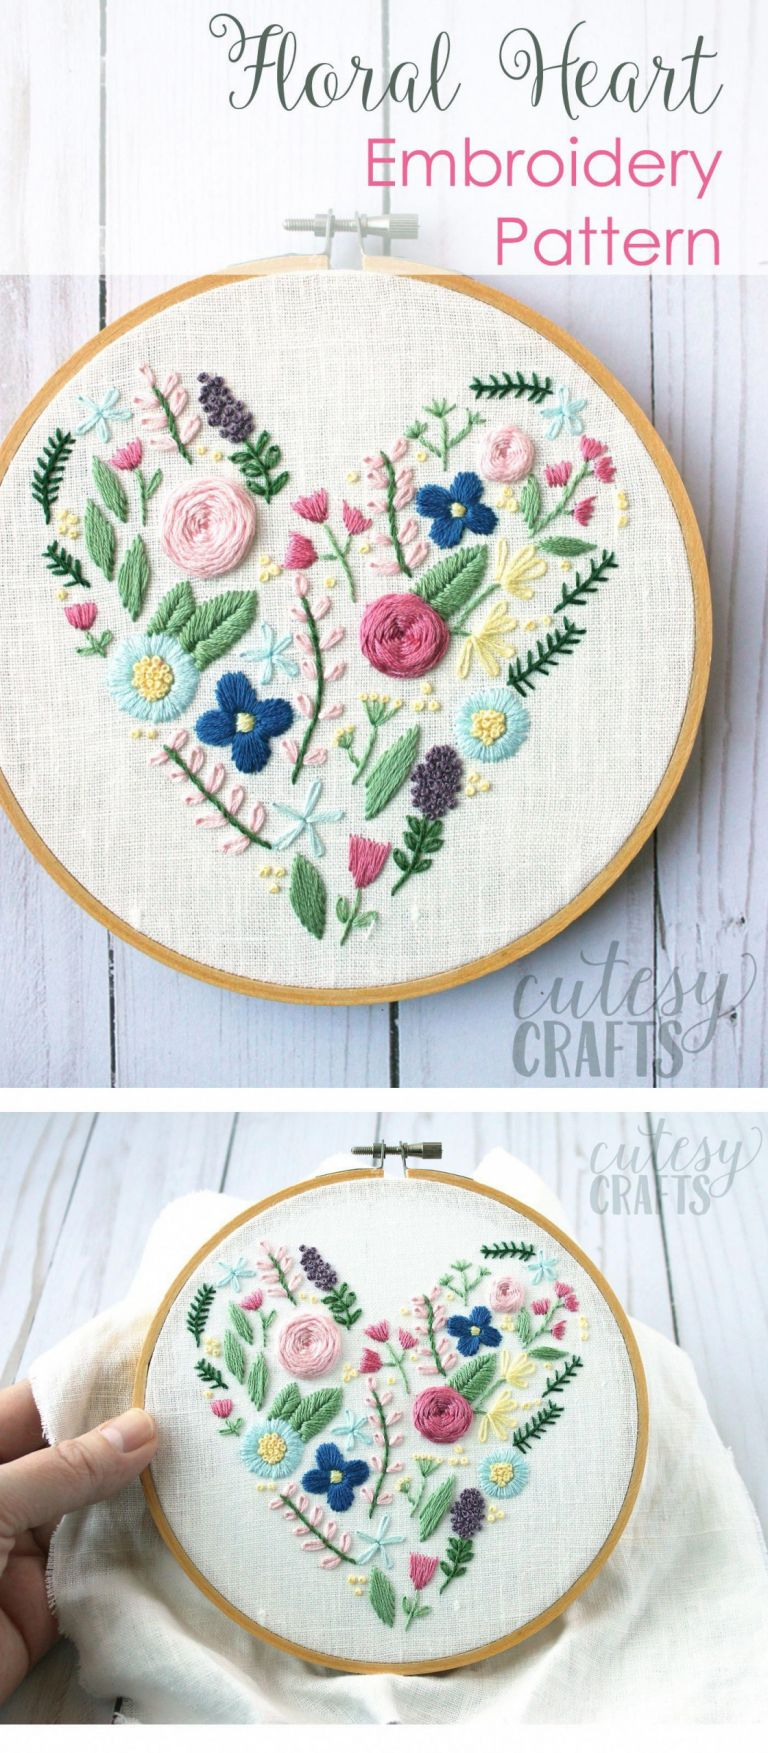 Hand Embroidery Patterns Free Hand Embroidery Patterns For Beginners Unique Learn Hand Embroidery